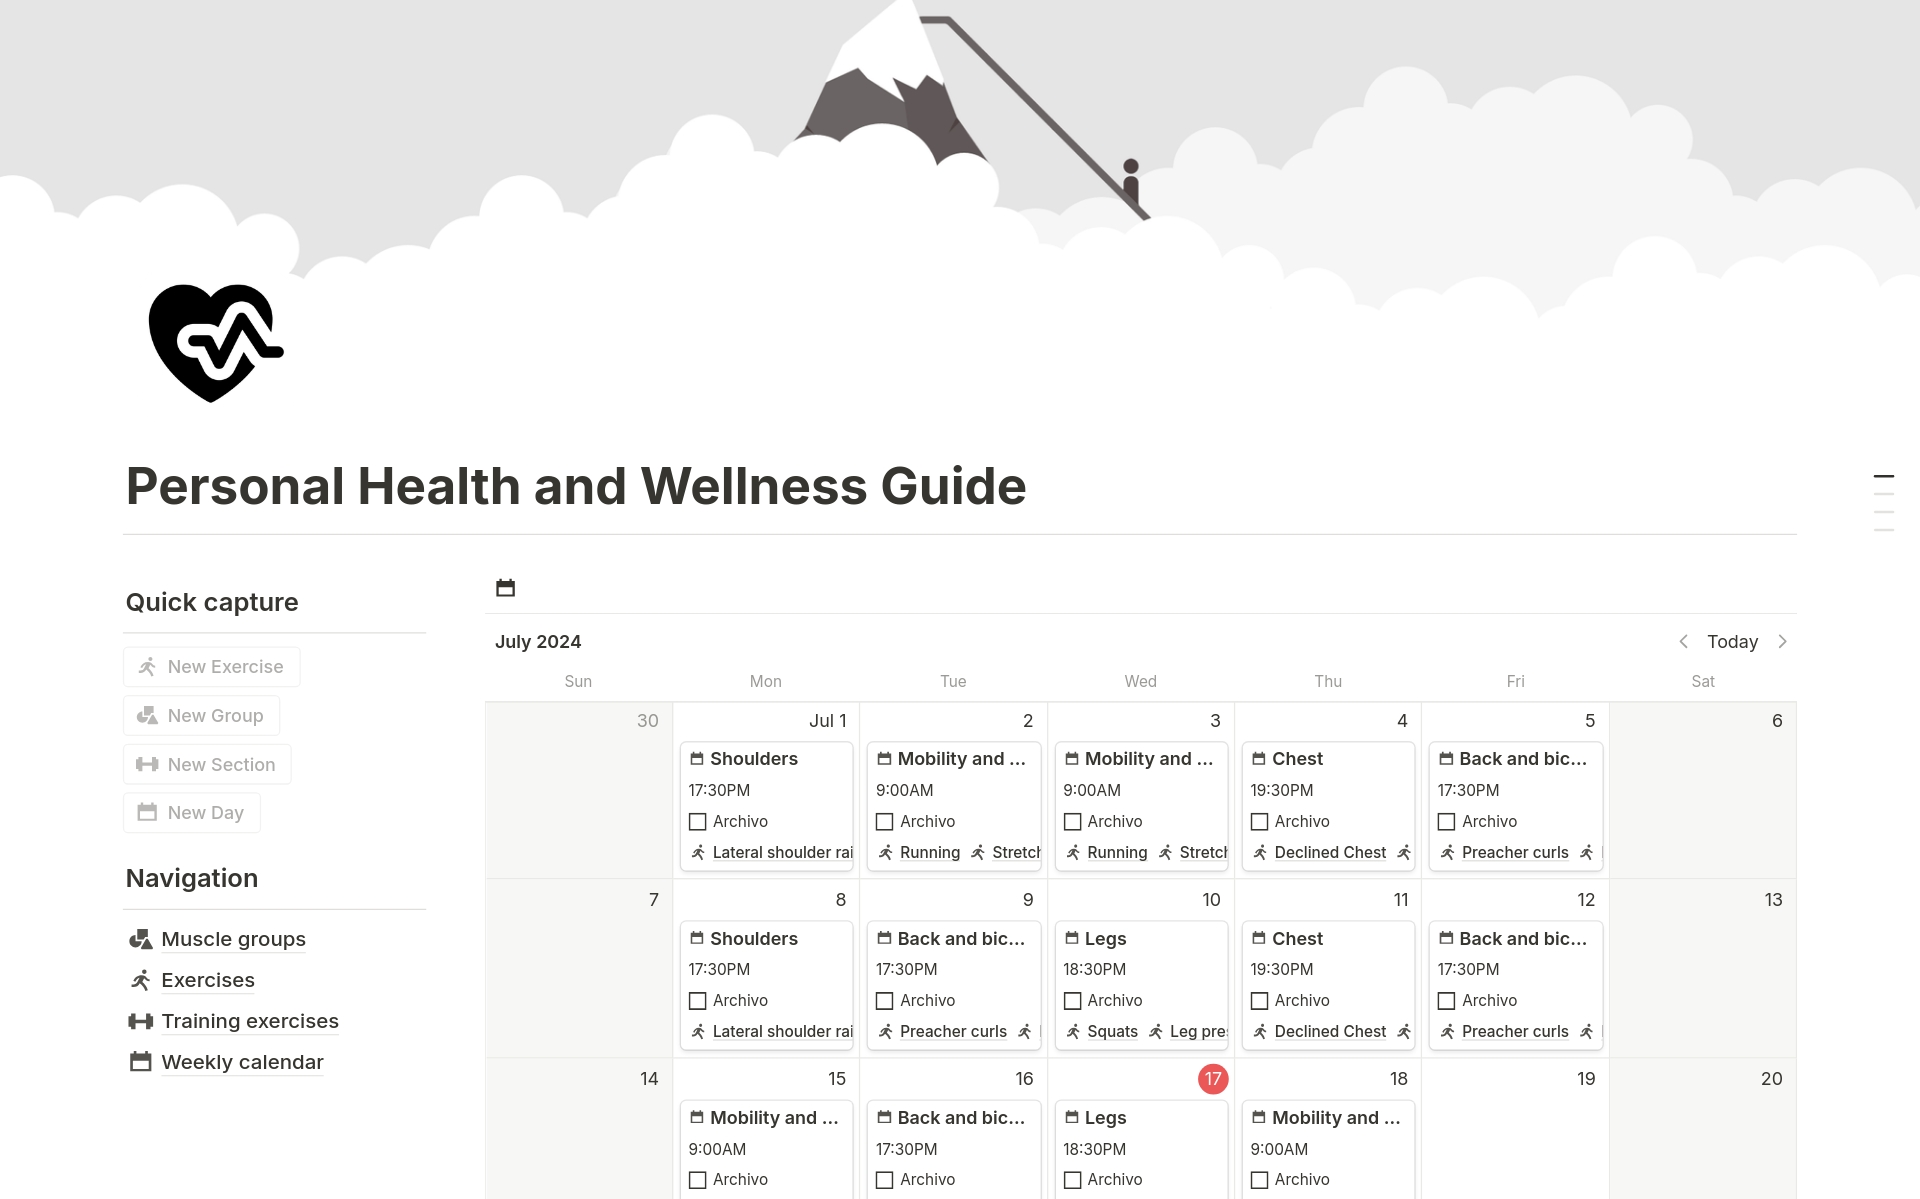 Keep track of your health and wellness habits, including diet, exercise and personal wellness goals.